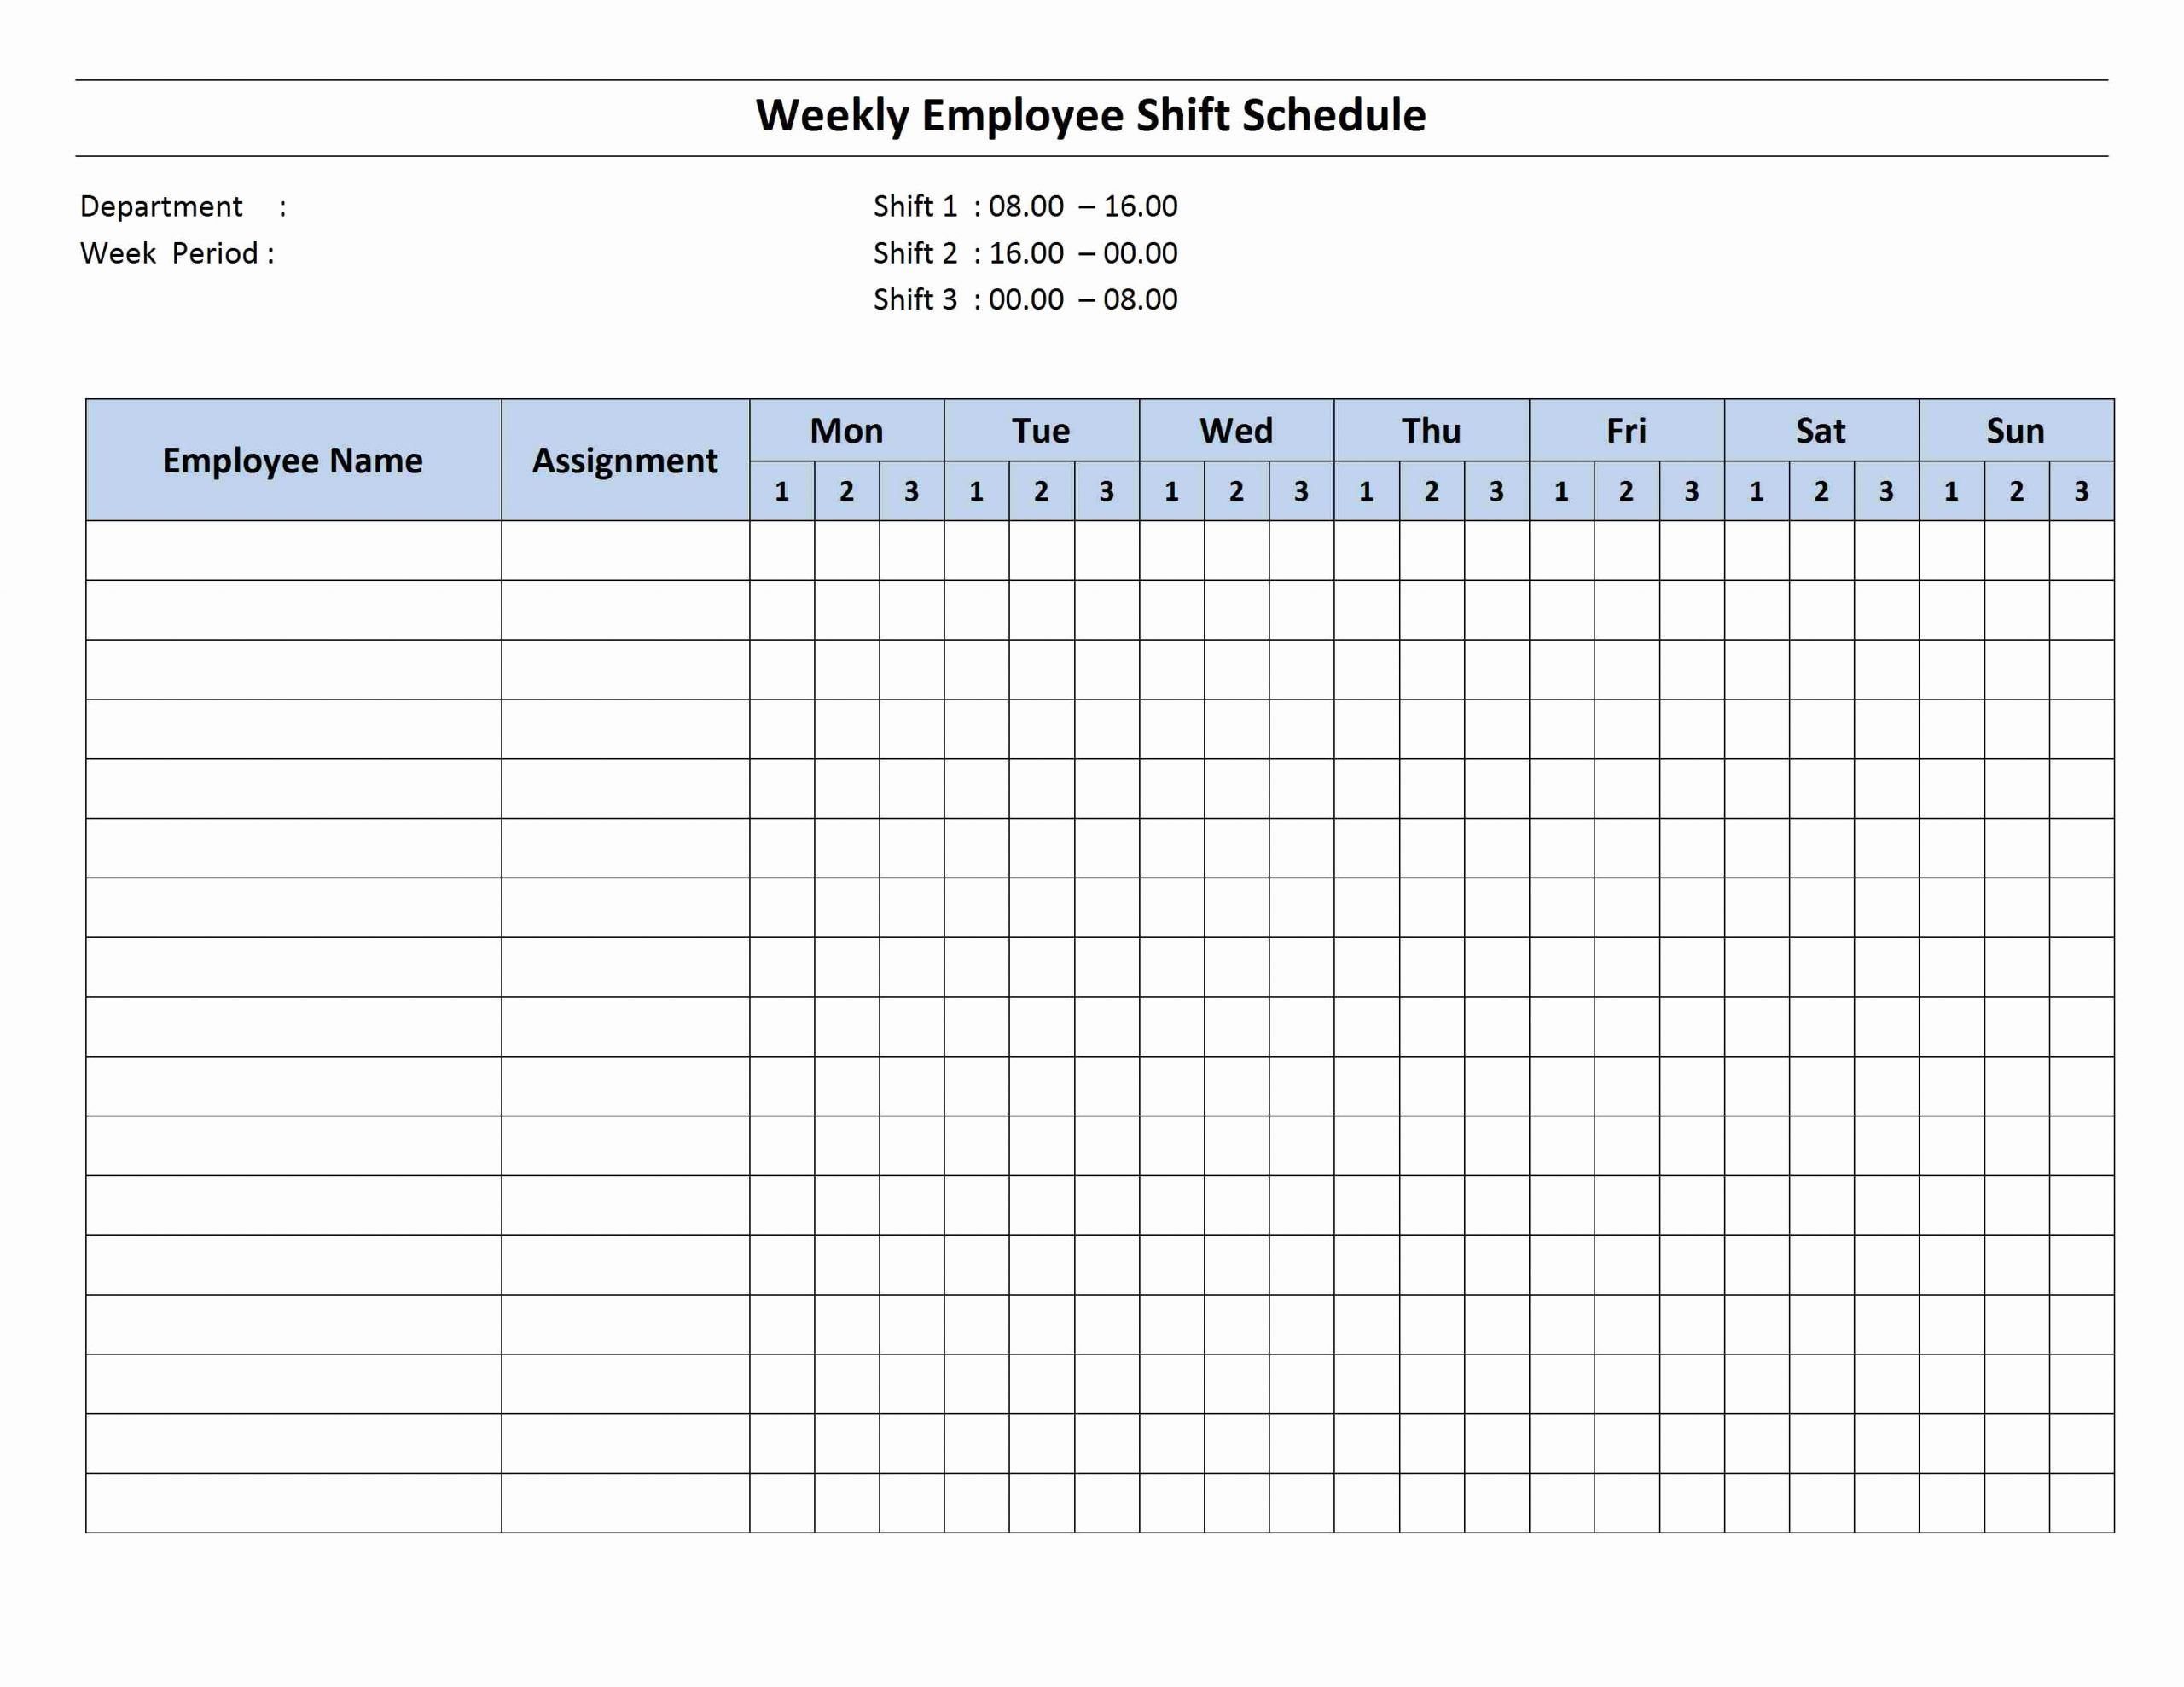 Work Schedule Template Word Lovely Weekly 8 Hour Shift Schedule